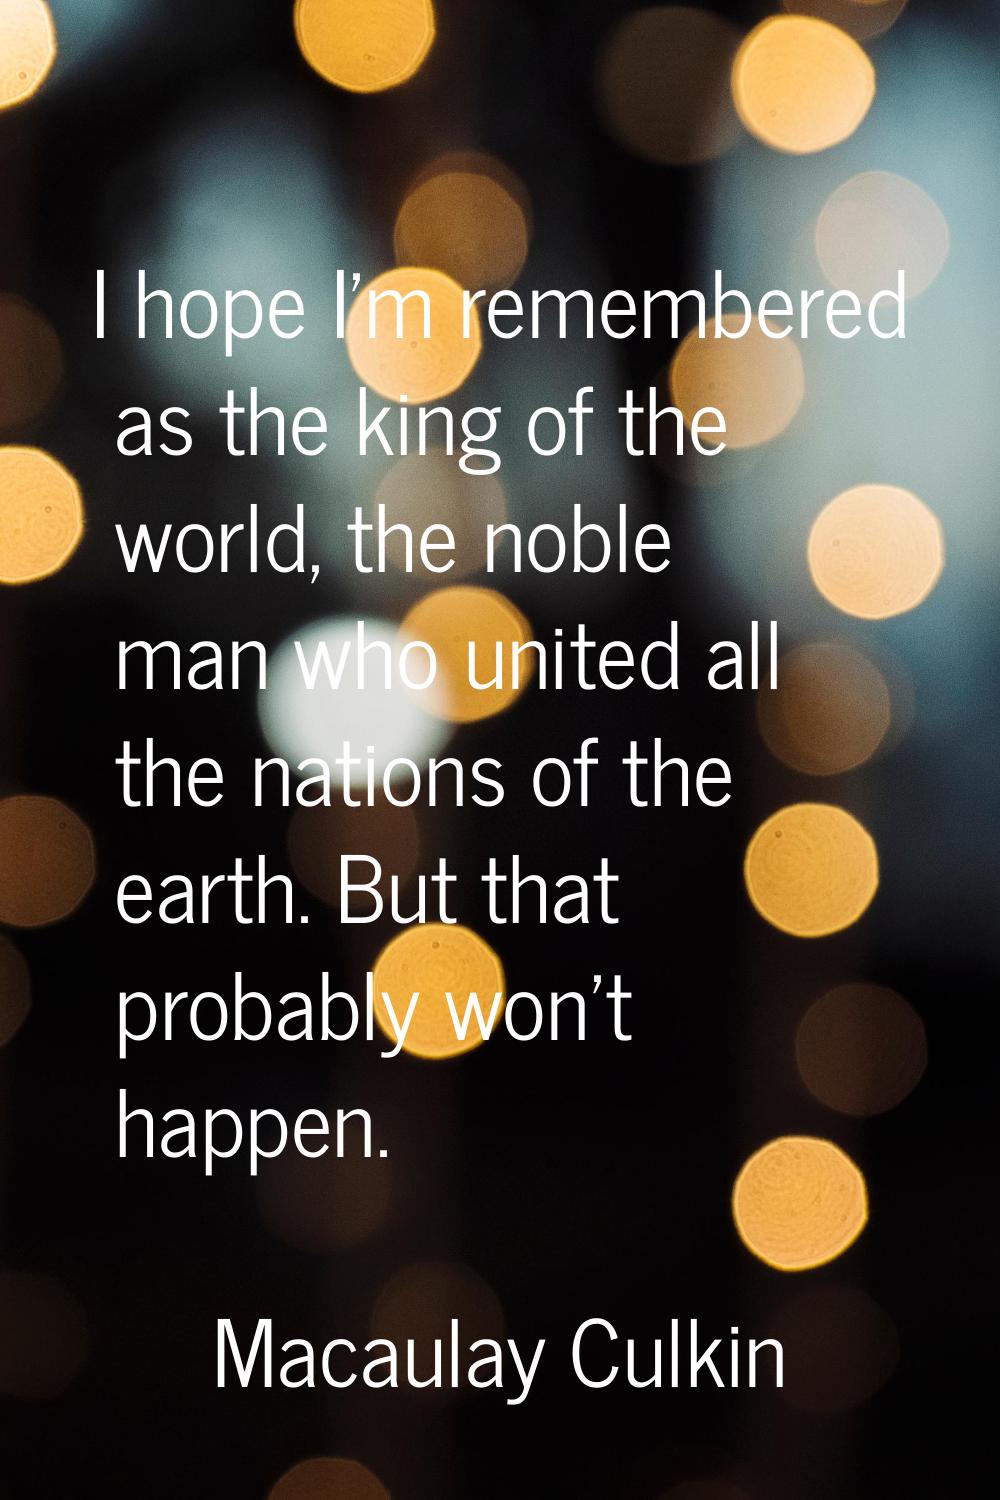 I hope I'm remembered as the king of the world, the noble man who united all the nations of the ear